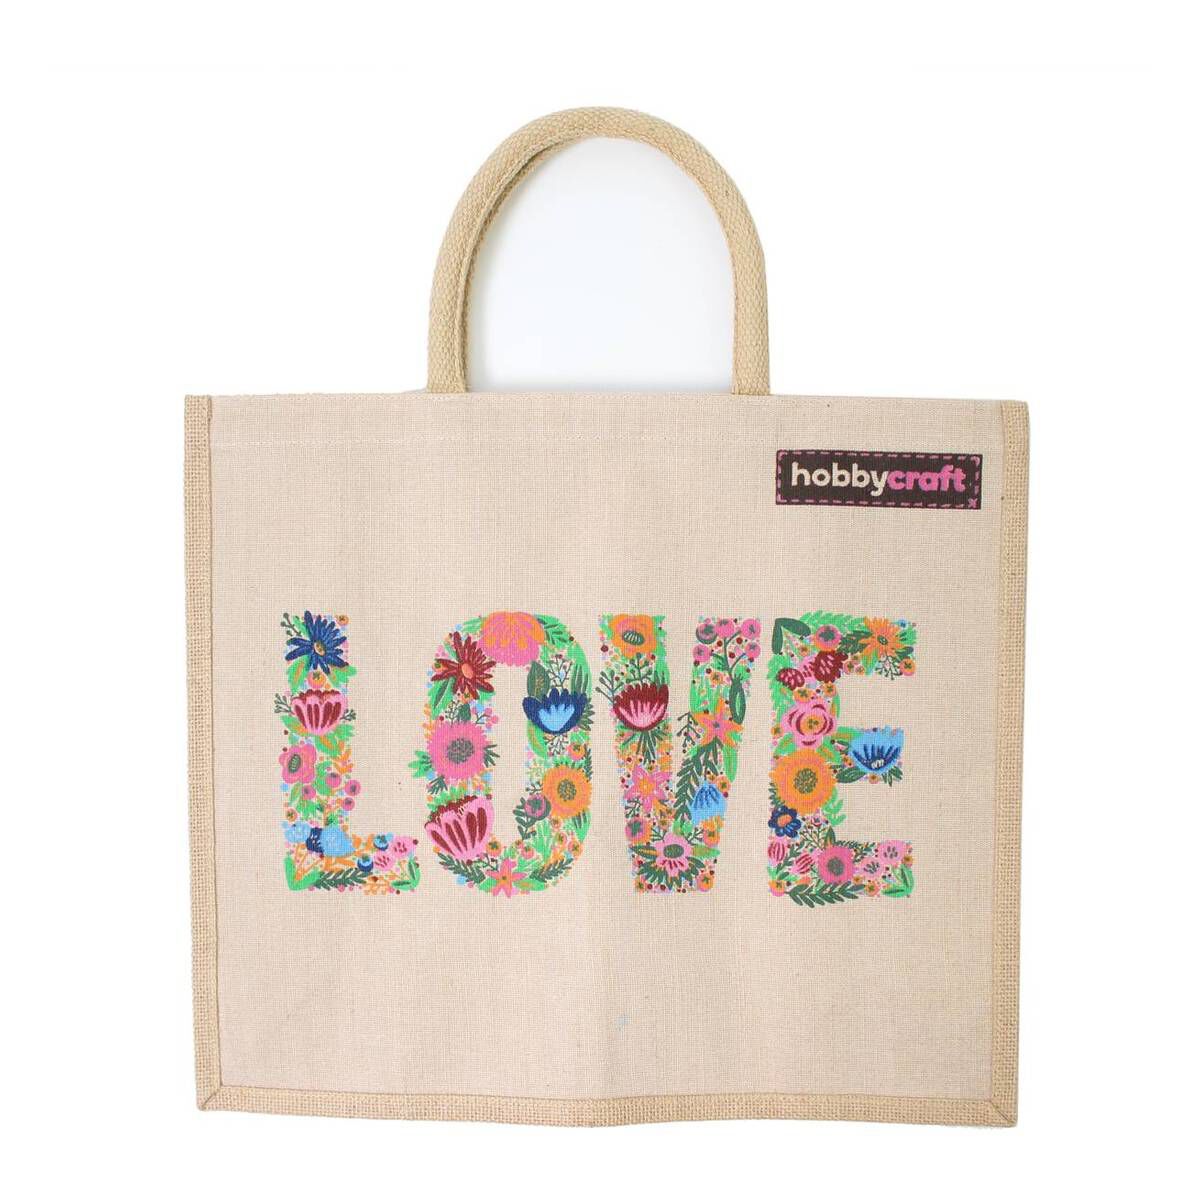 Cricut: How to Personalise a Tote Bag with Iron-On | Hobbycraft